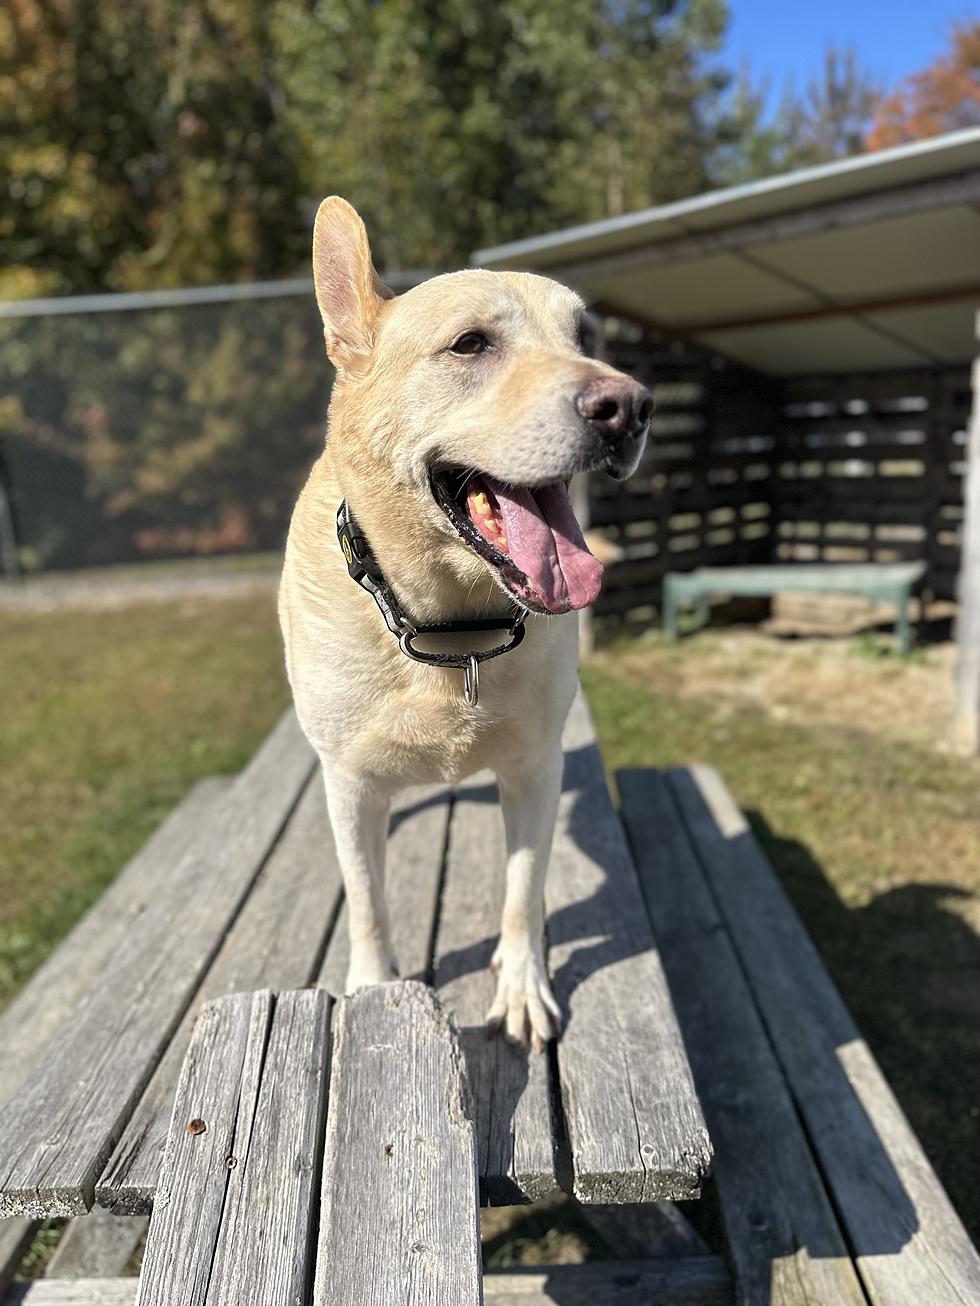 Hancock County SPCA Has A Big Dog With A Big Personality As The ‘Pet Of The Week’